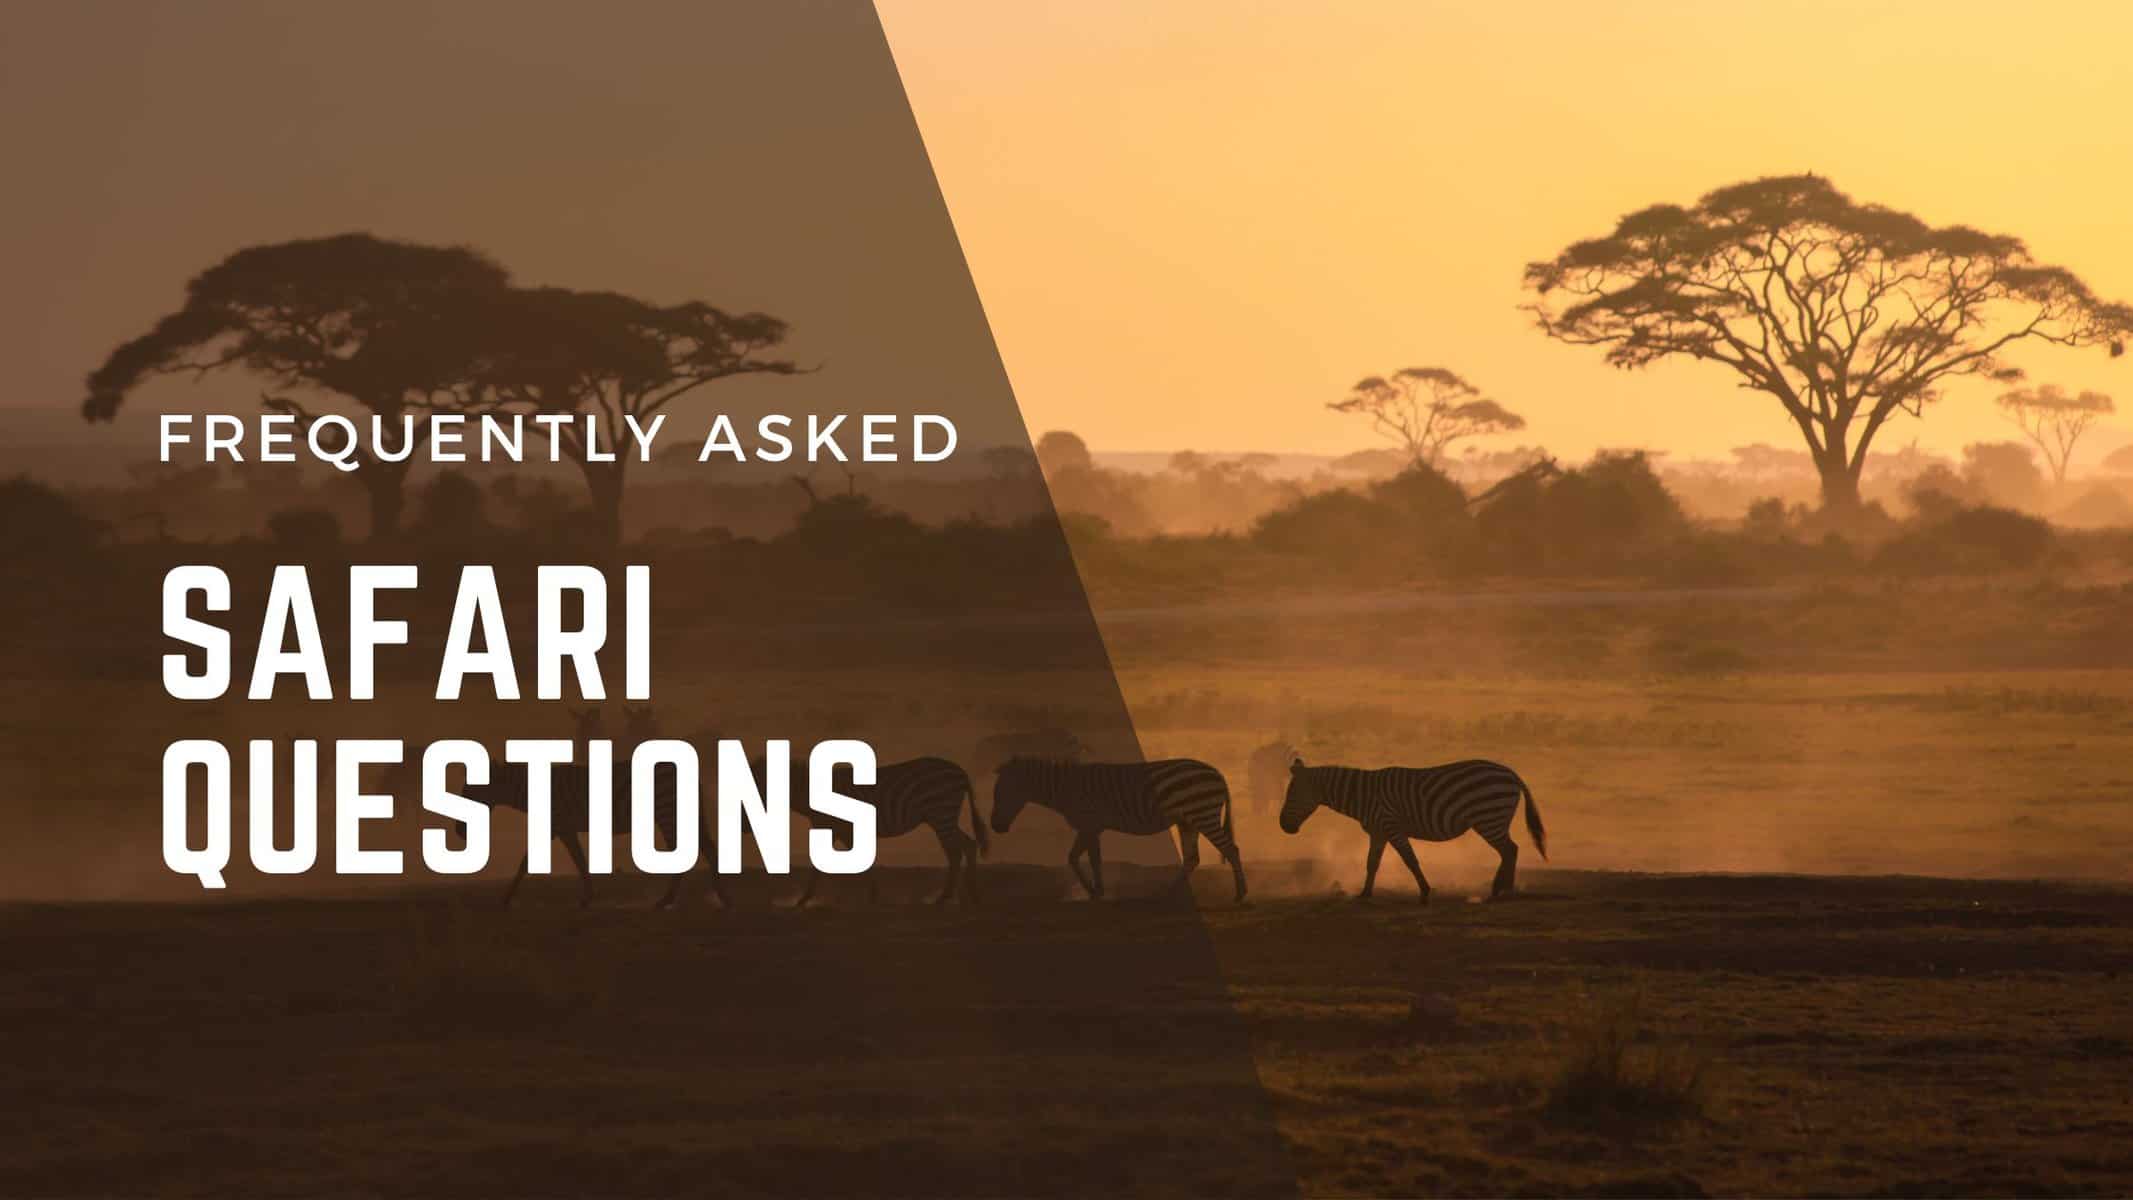 Frequently Asked Safari Questions